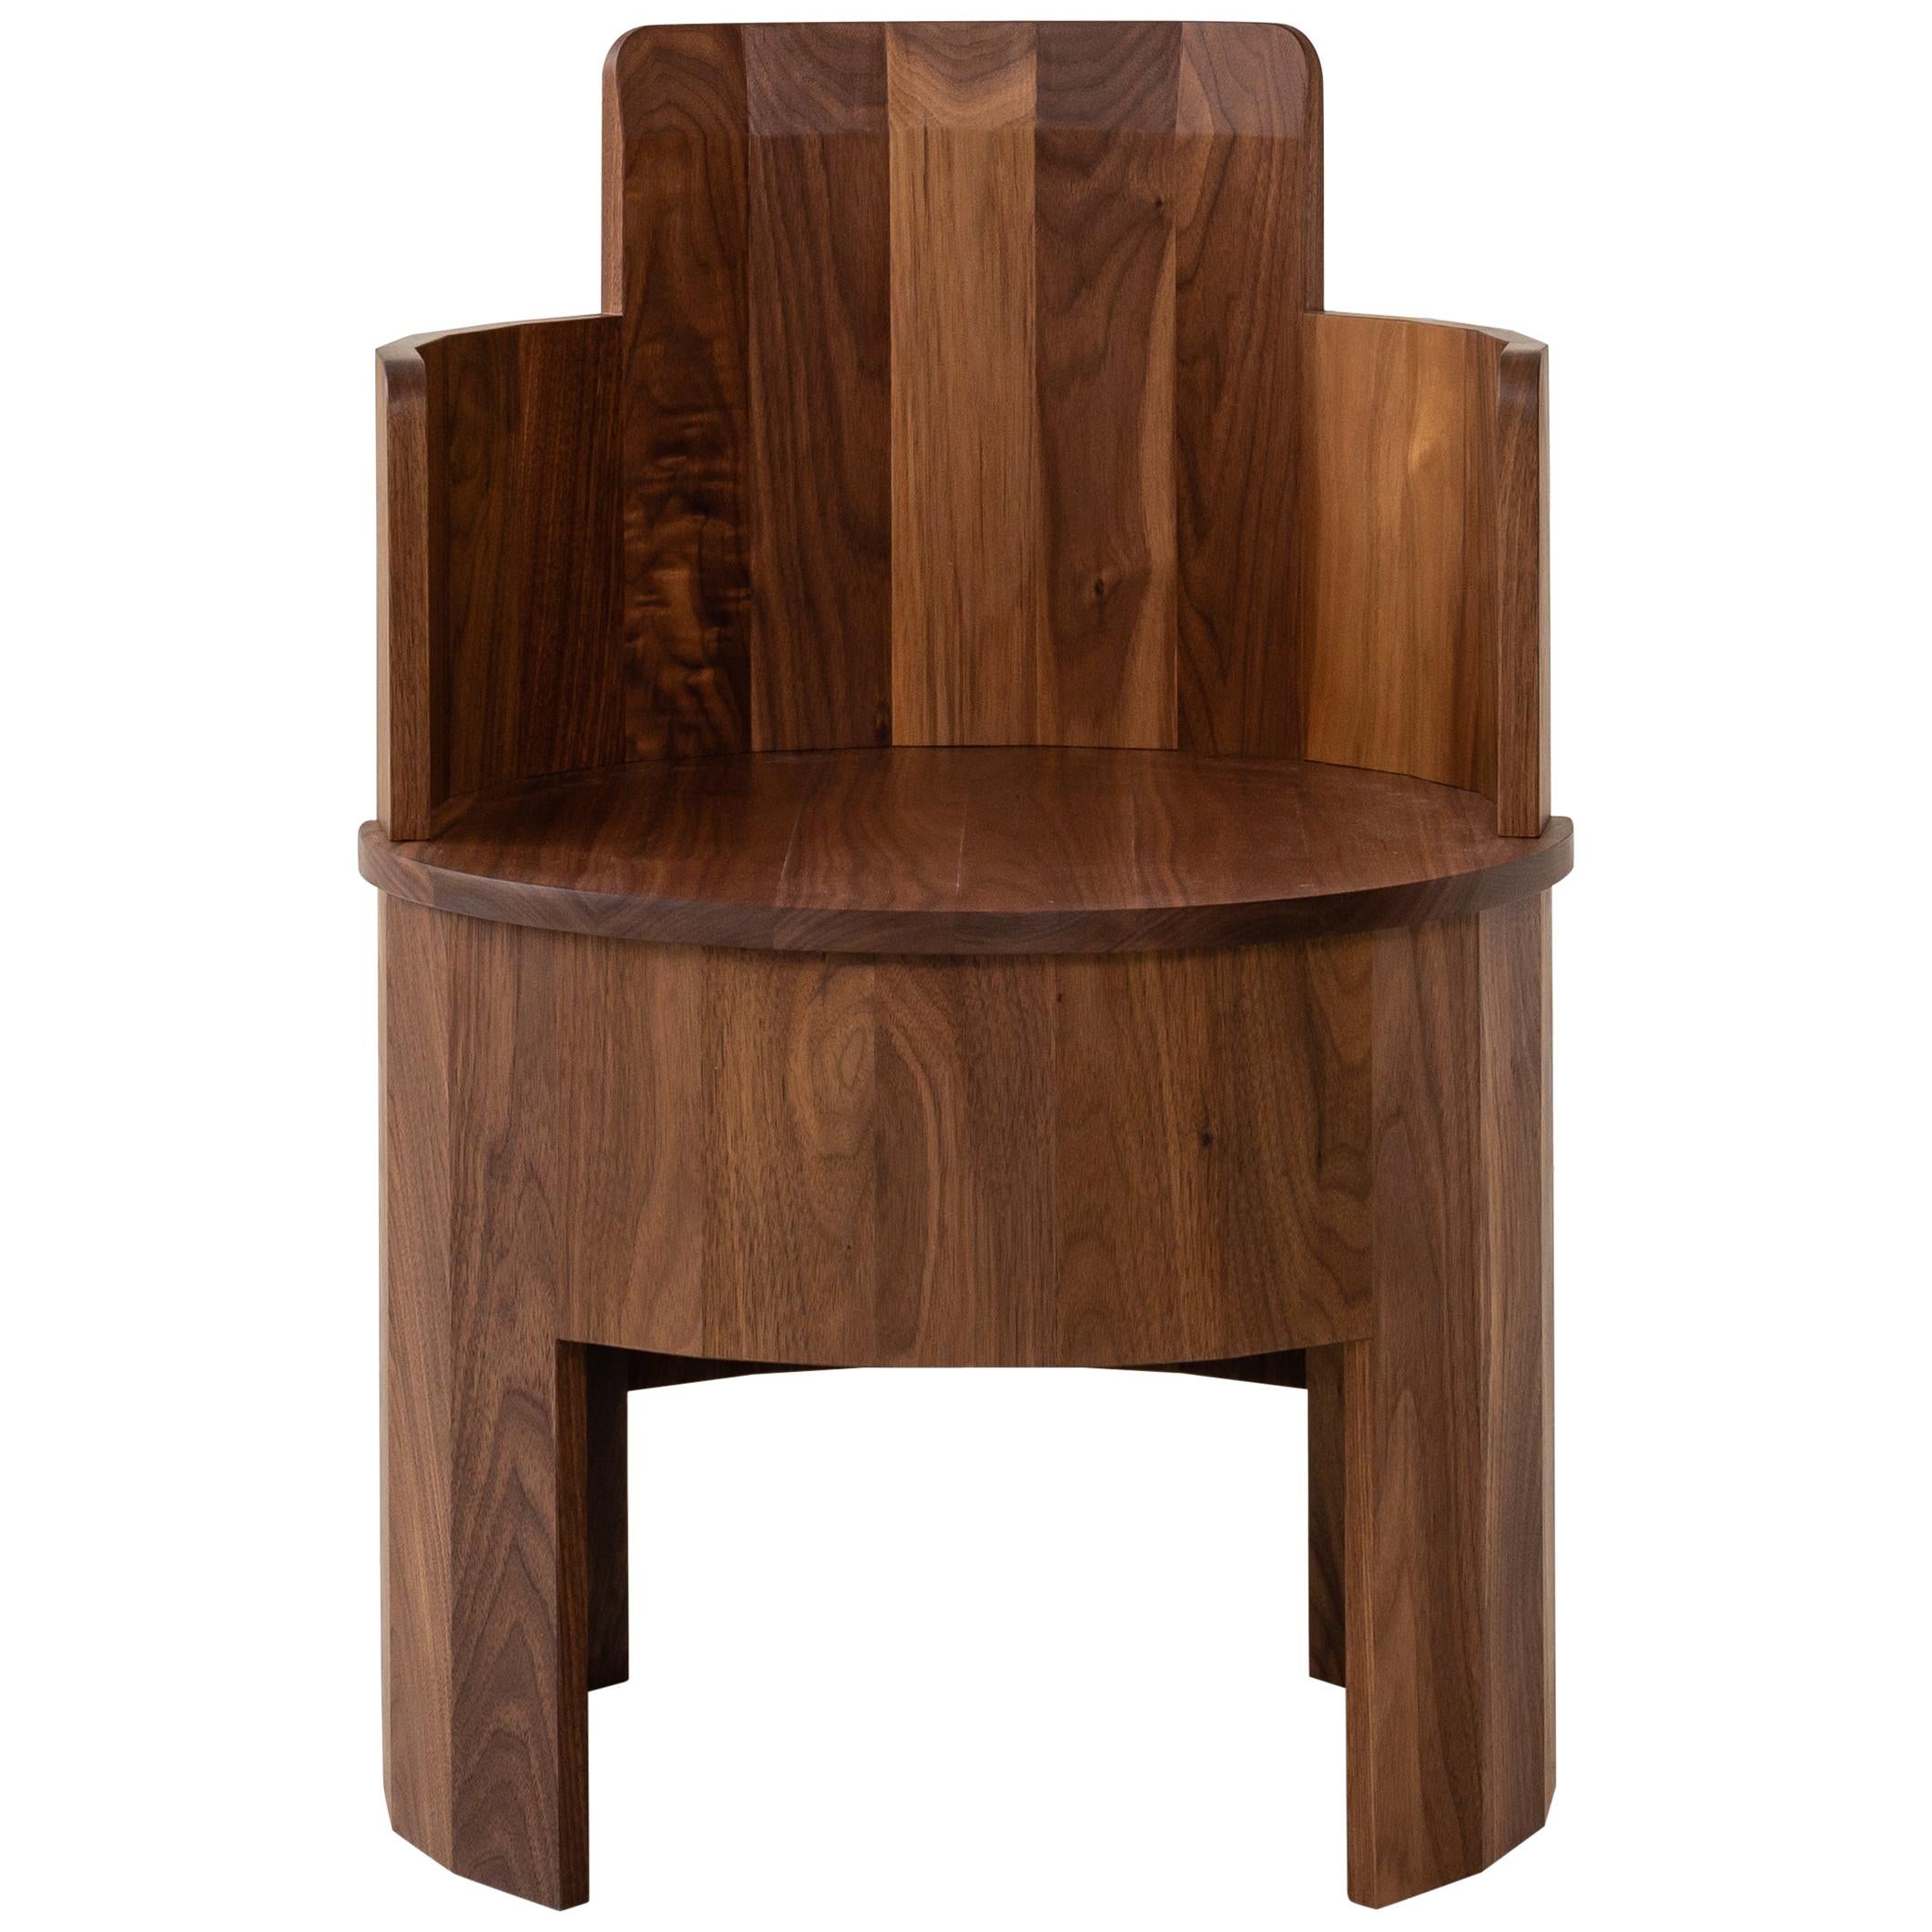 Contemporary Walnut Wood Cooperage Chair by Fort Standard, in Stock